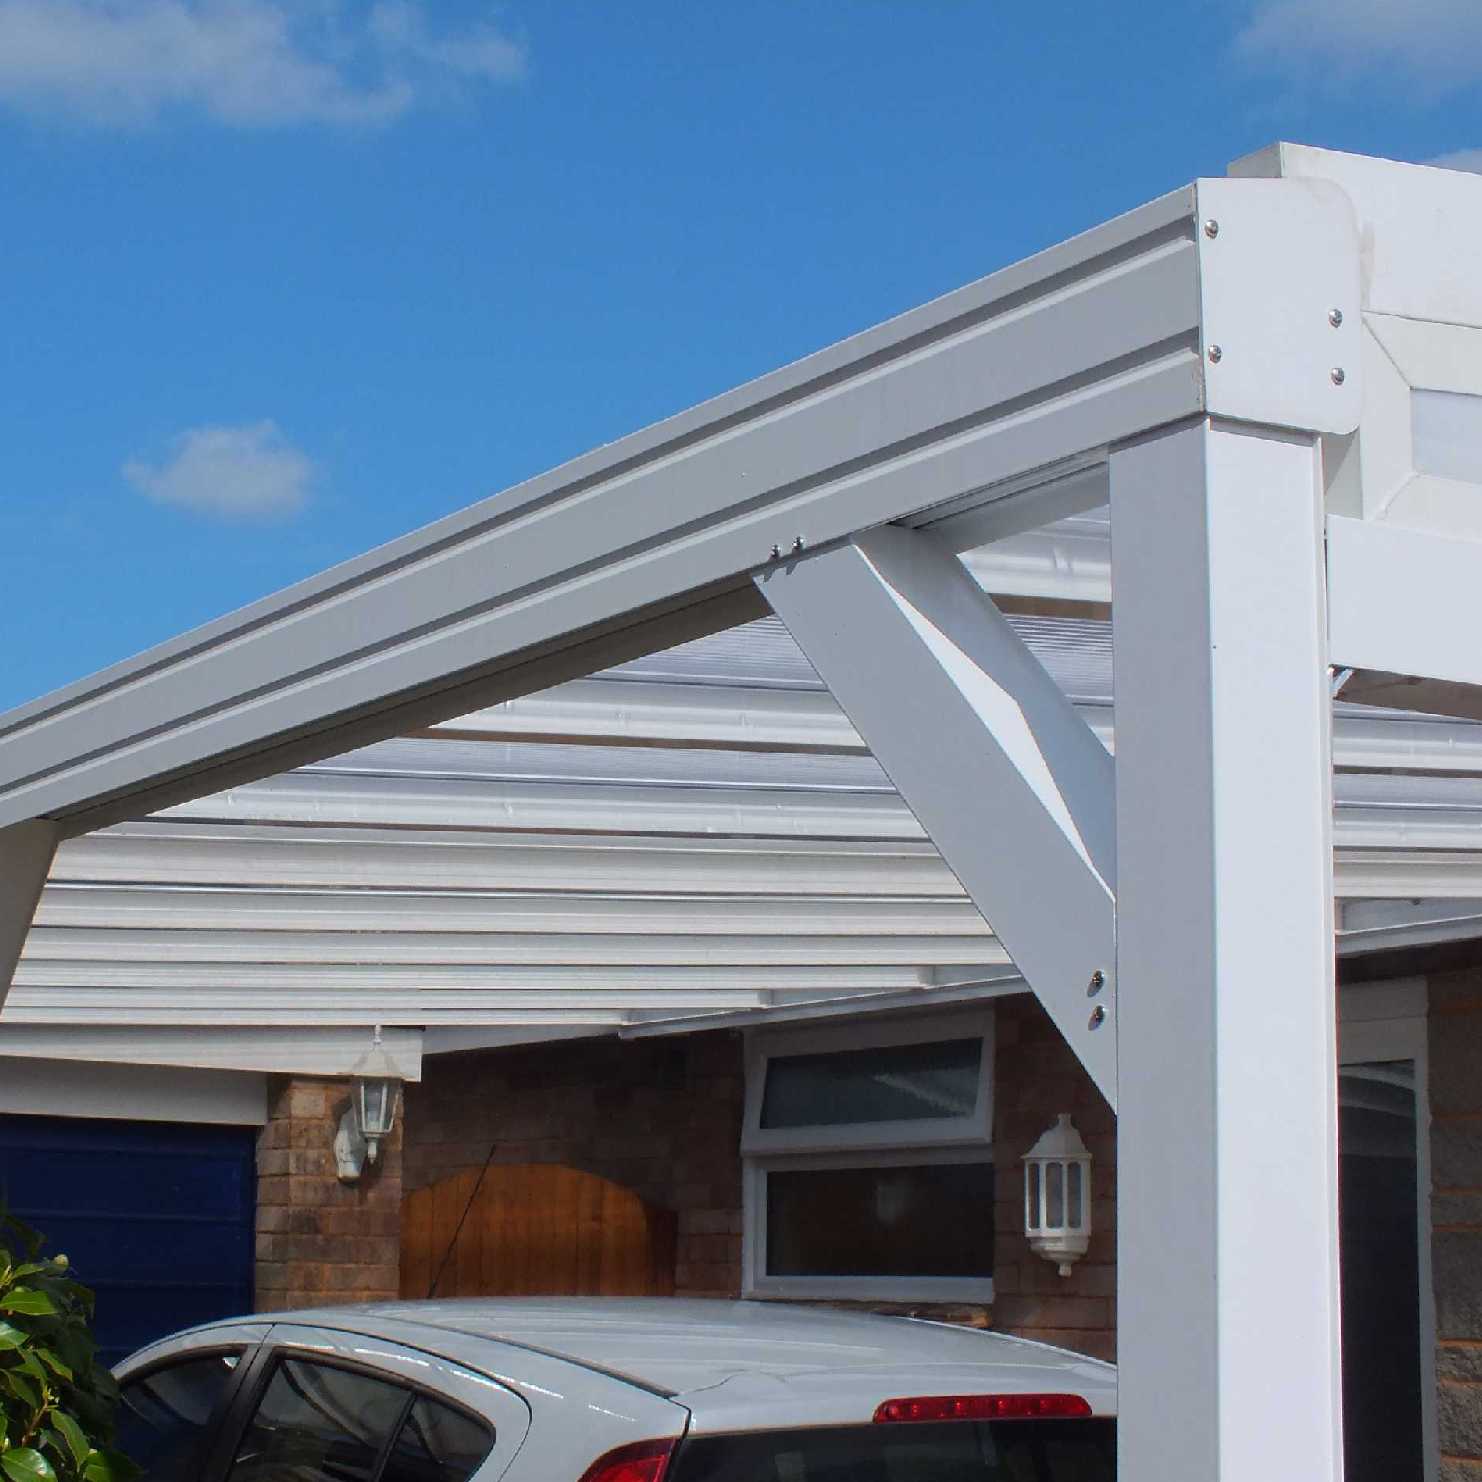 Great deals on Omega Smart Lean-To Canopy, White with 16mm Polycarbonate Glazing - 6.3m (W) x 1.5m (P), (4) Supporting Posts